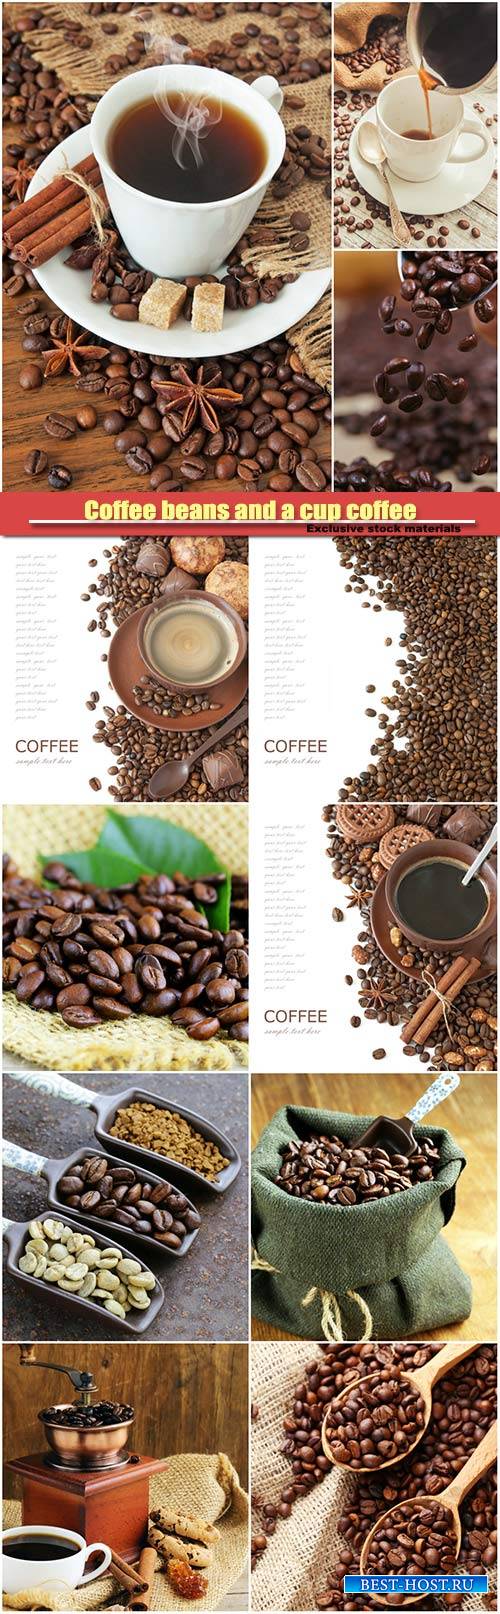 Coffee beans and a cup of fragrant coffee